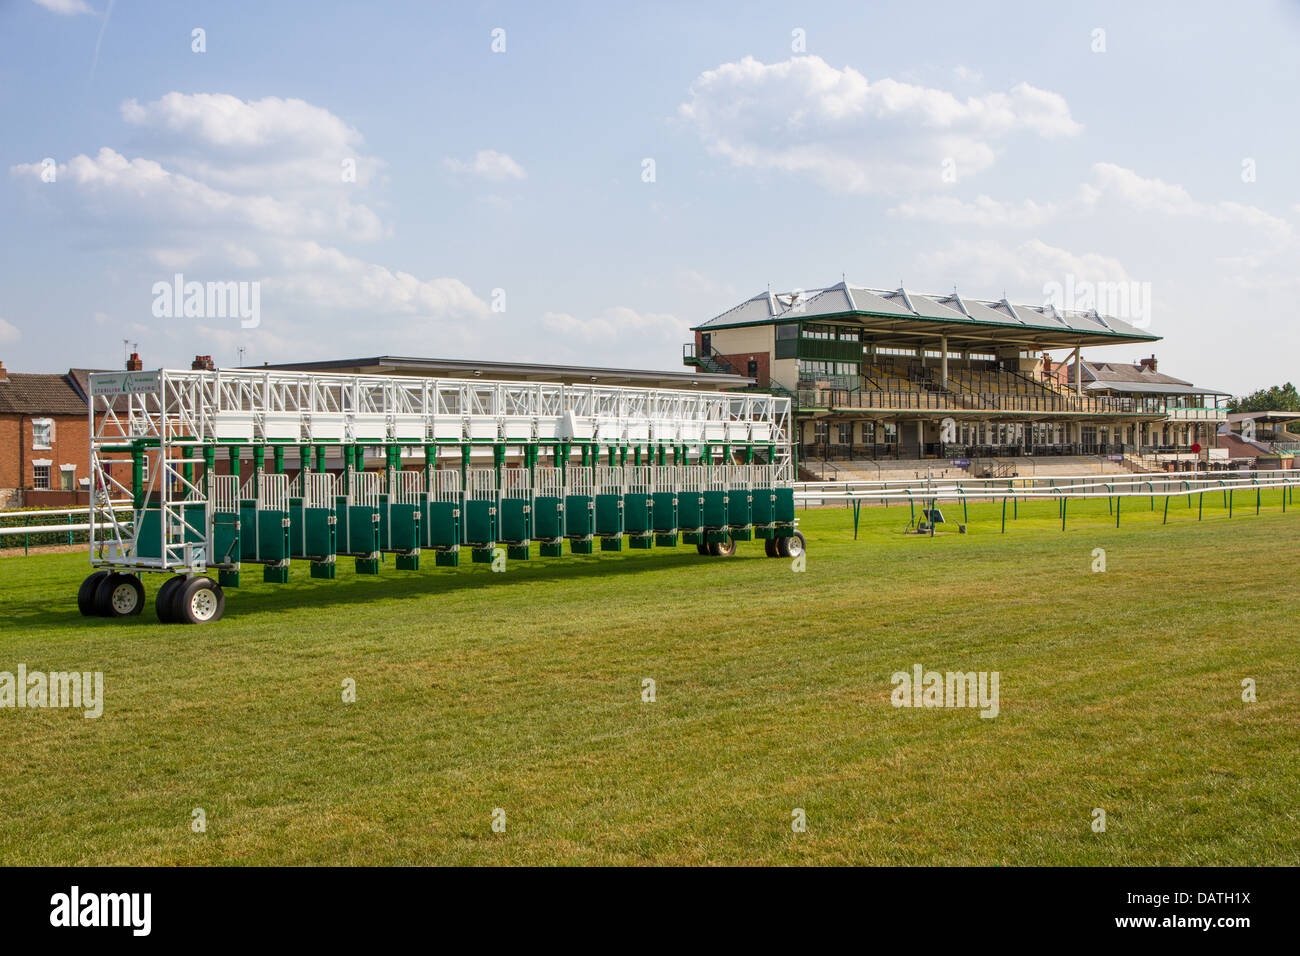 Starting gate and grandstand at Warwick Race Course Stock Photo